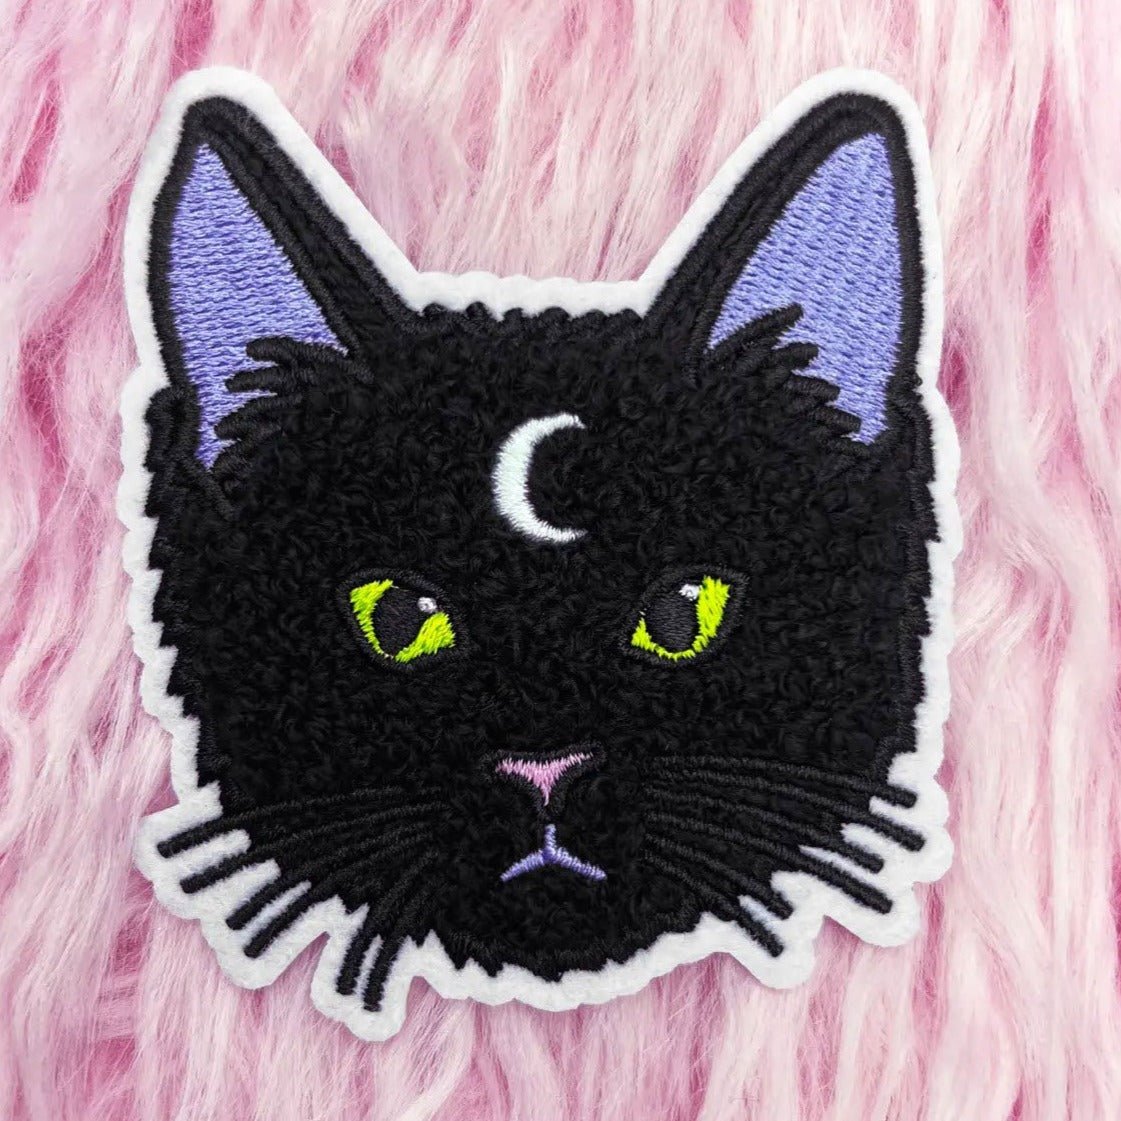 Embroidery Patch Space Cat Program Iron-on 